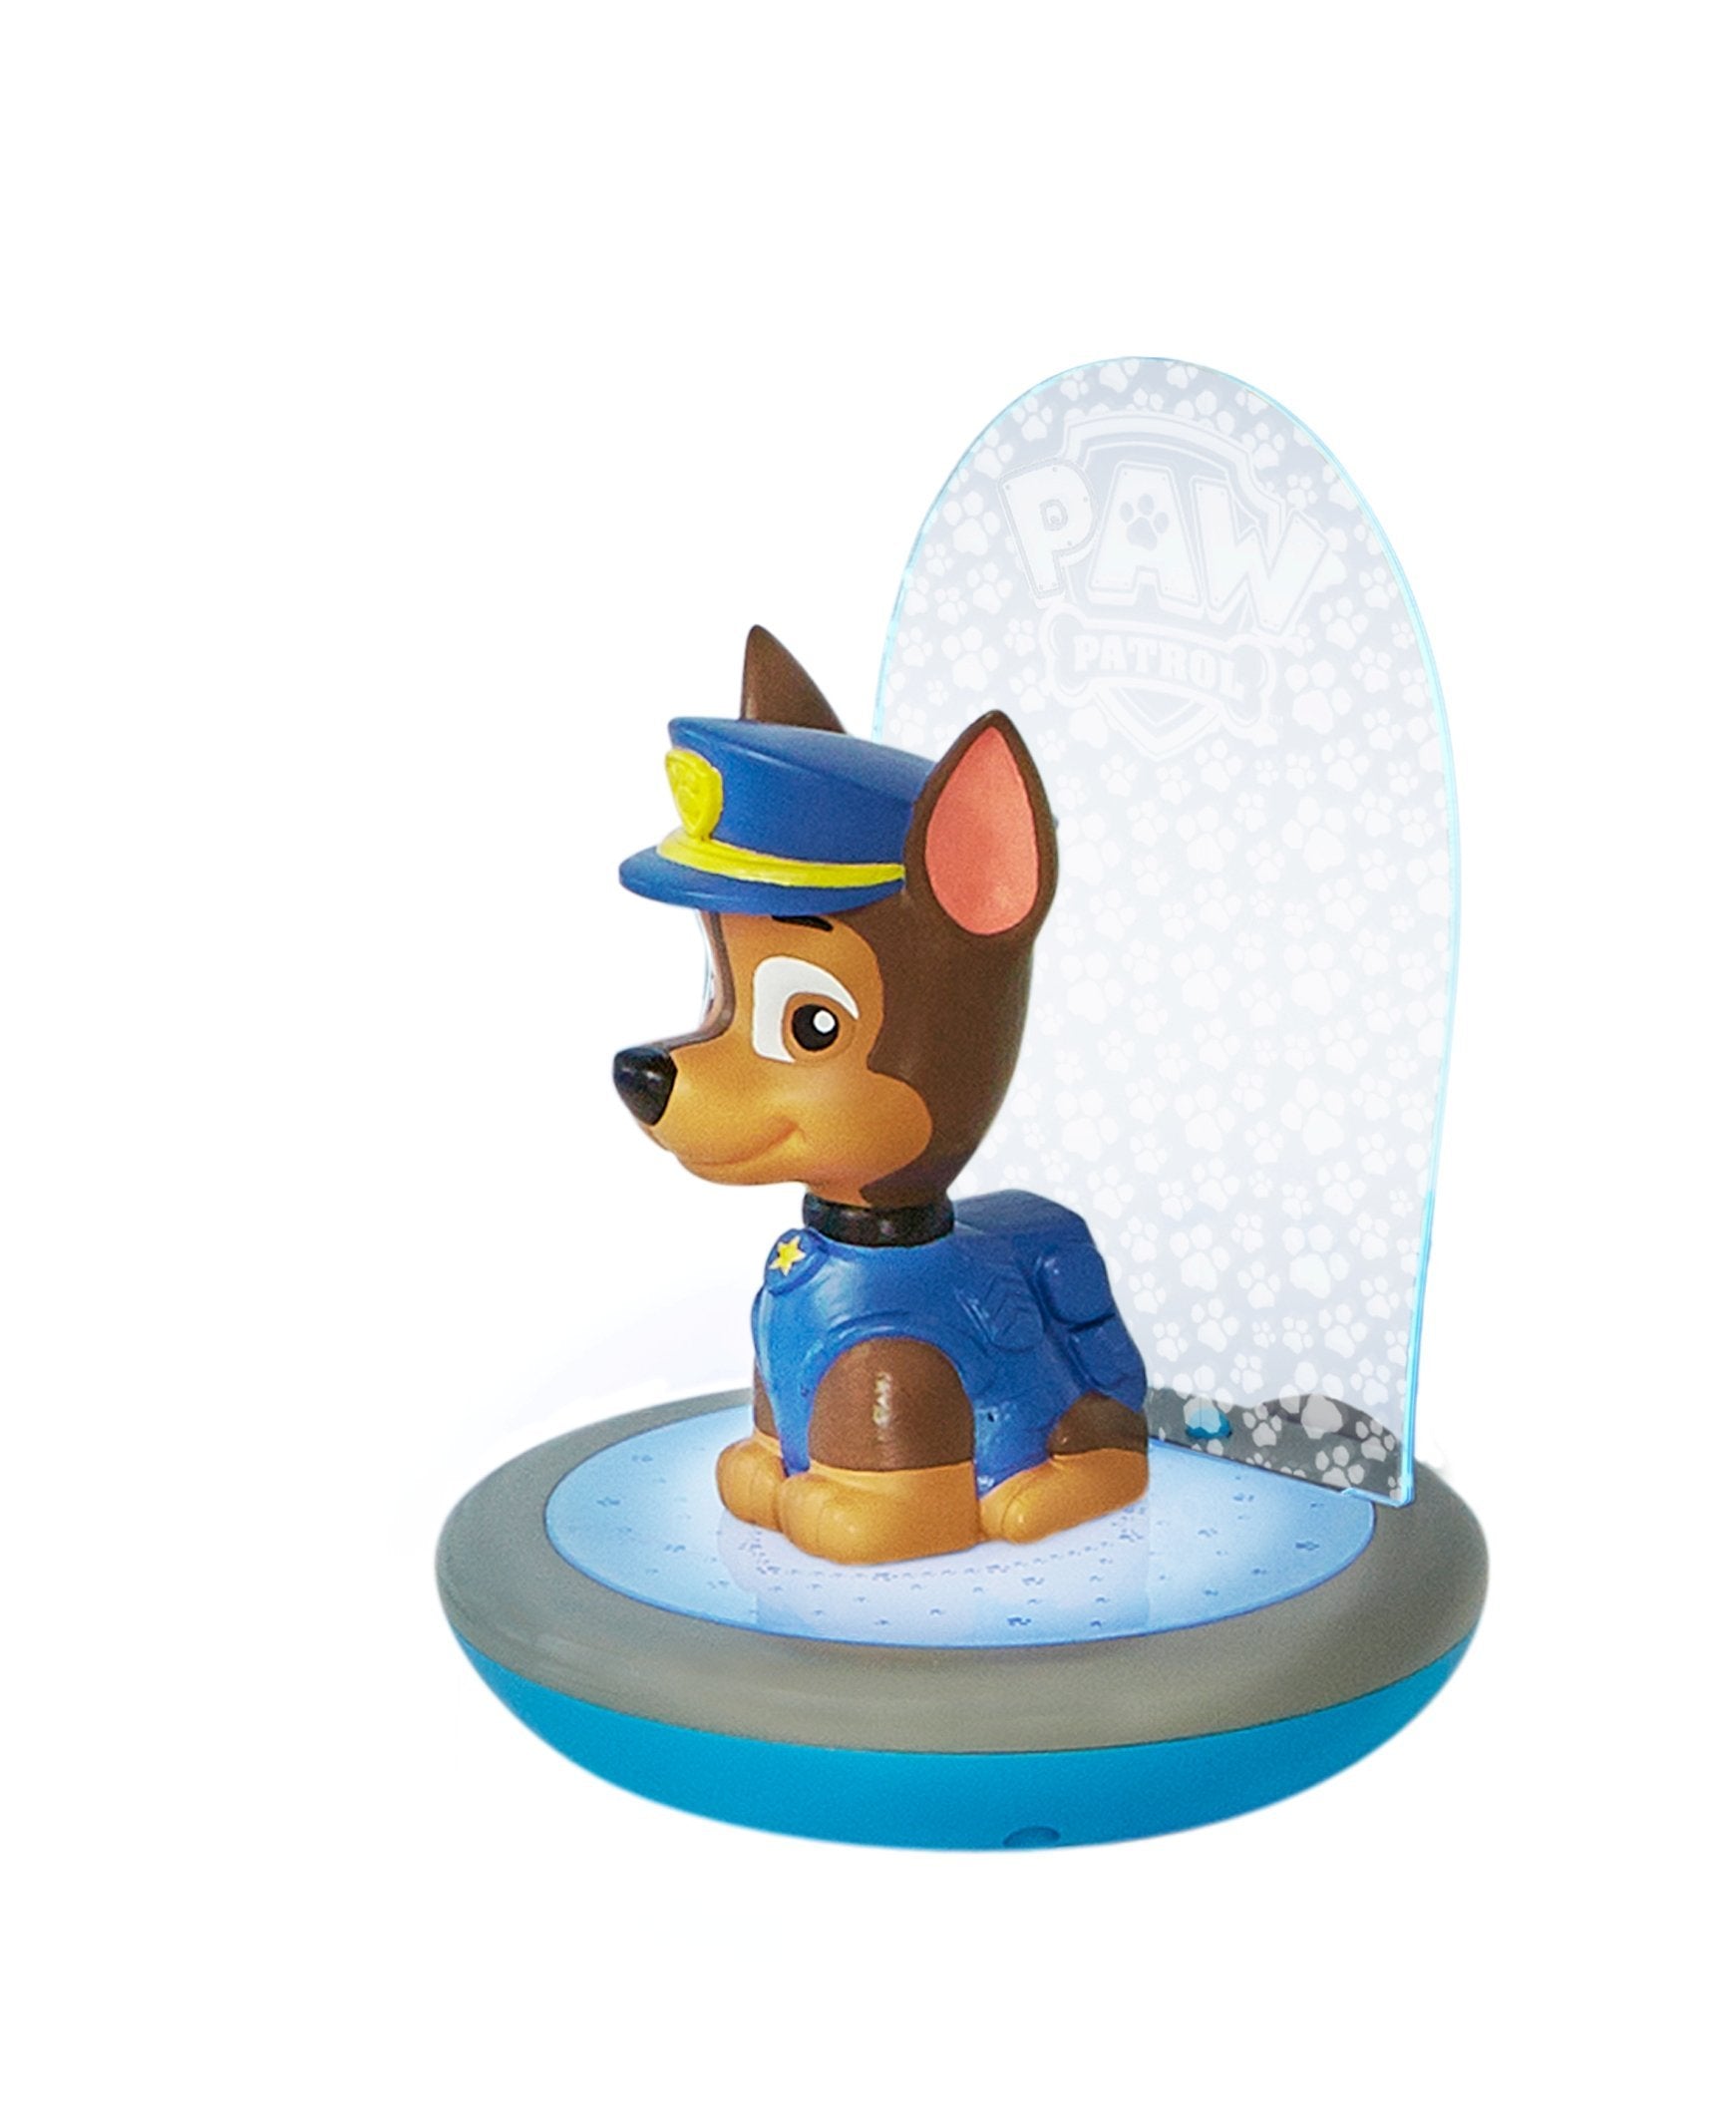 Paw Patrol Magic Night Light - Chase Kids Torch and Projector by Go Glow, Multi-Colour